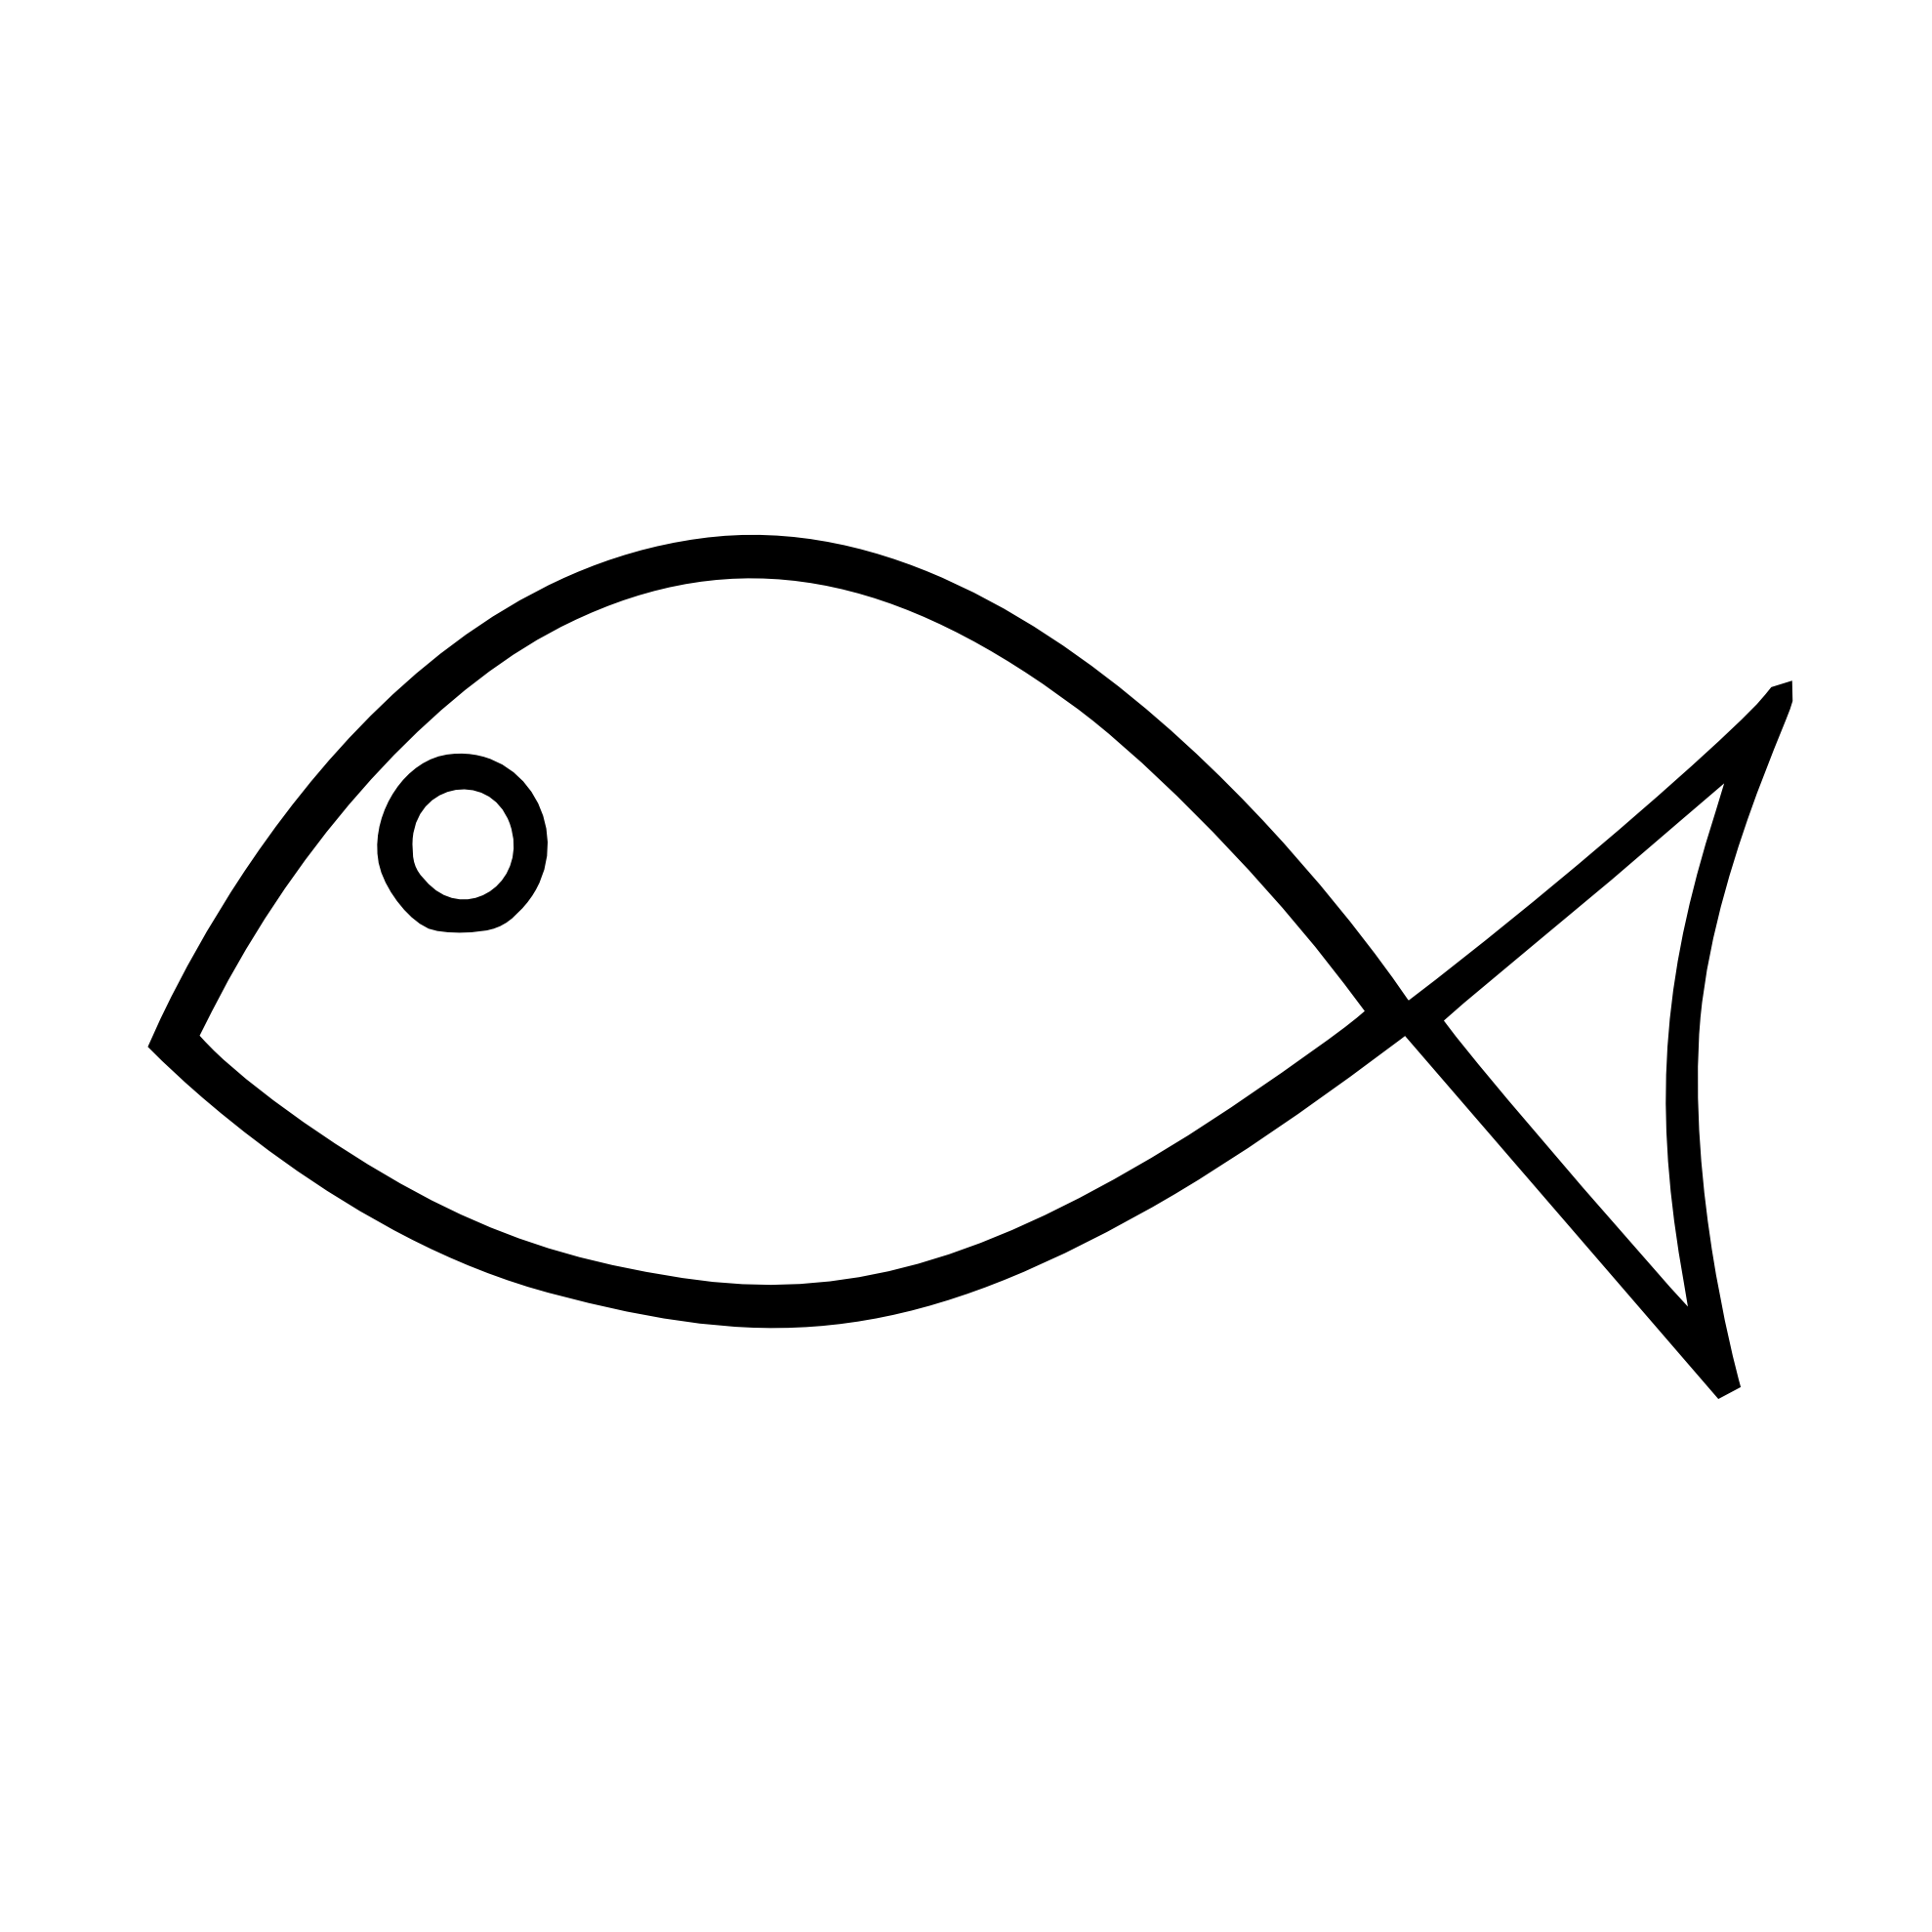 Simple Line Drawings Of Fish | Line Drawing